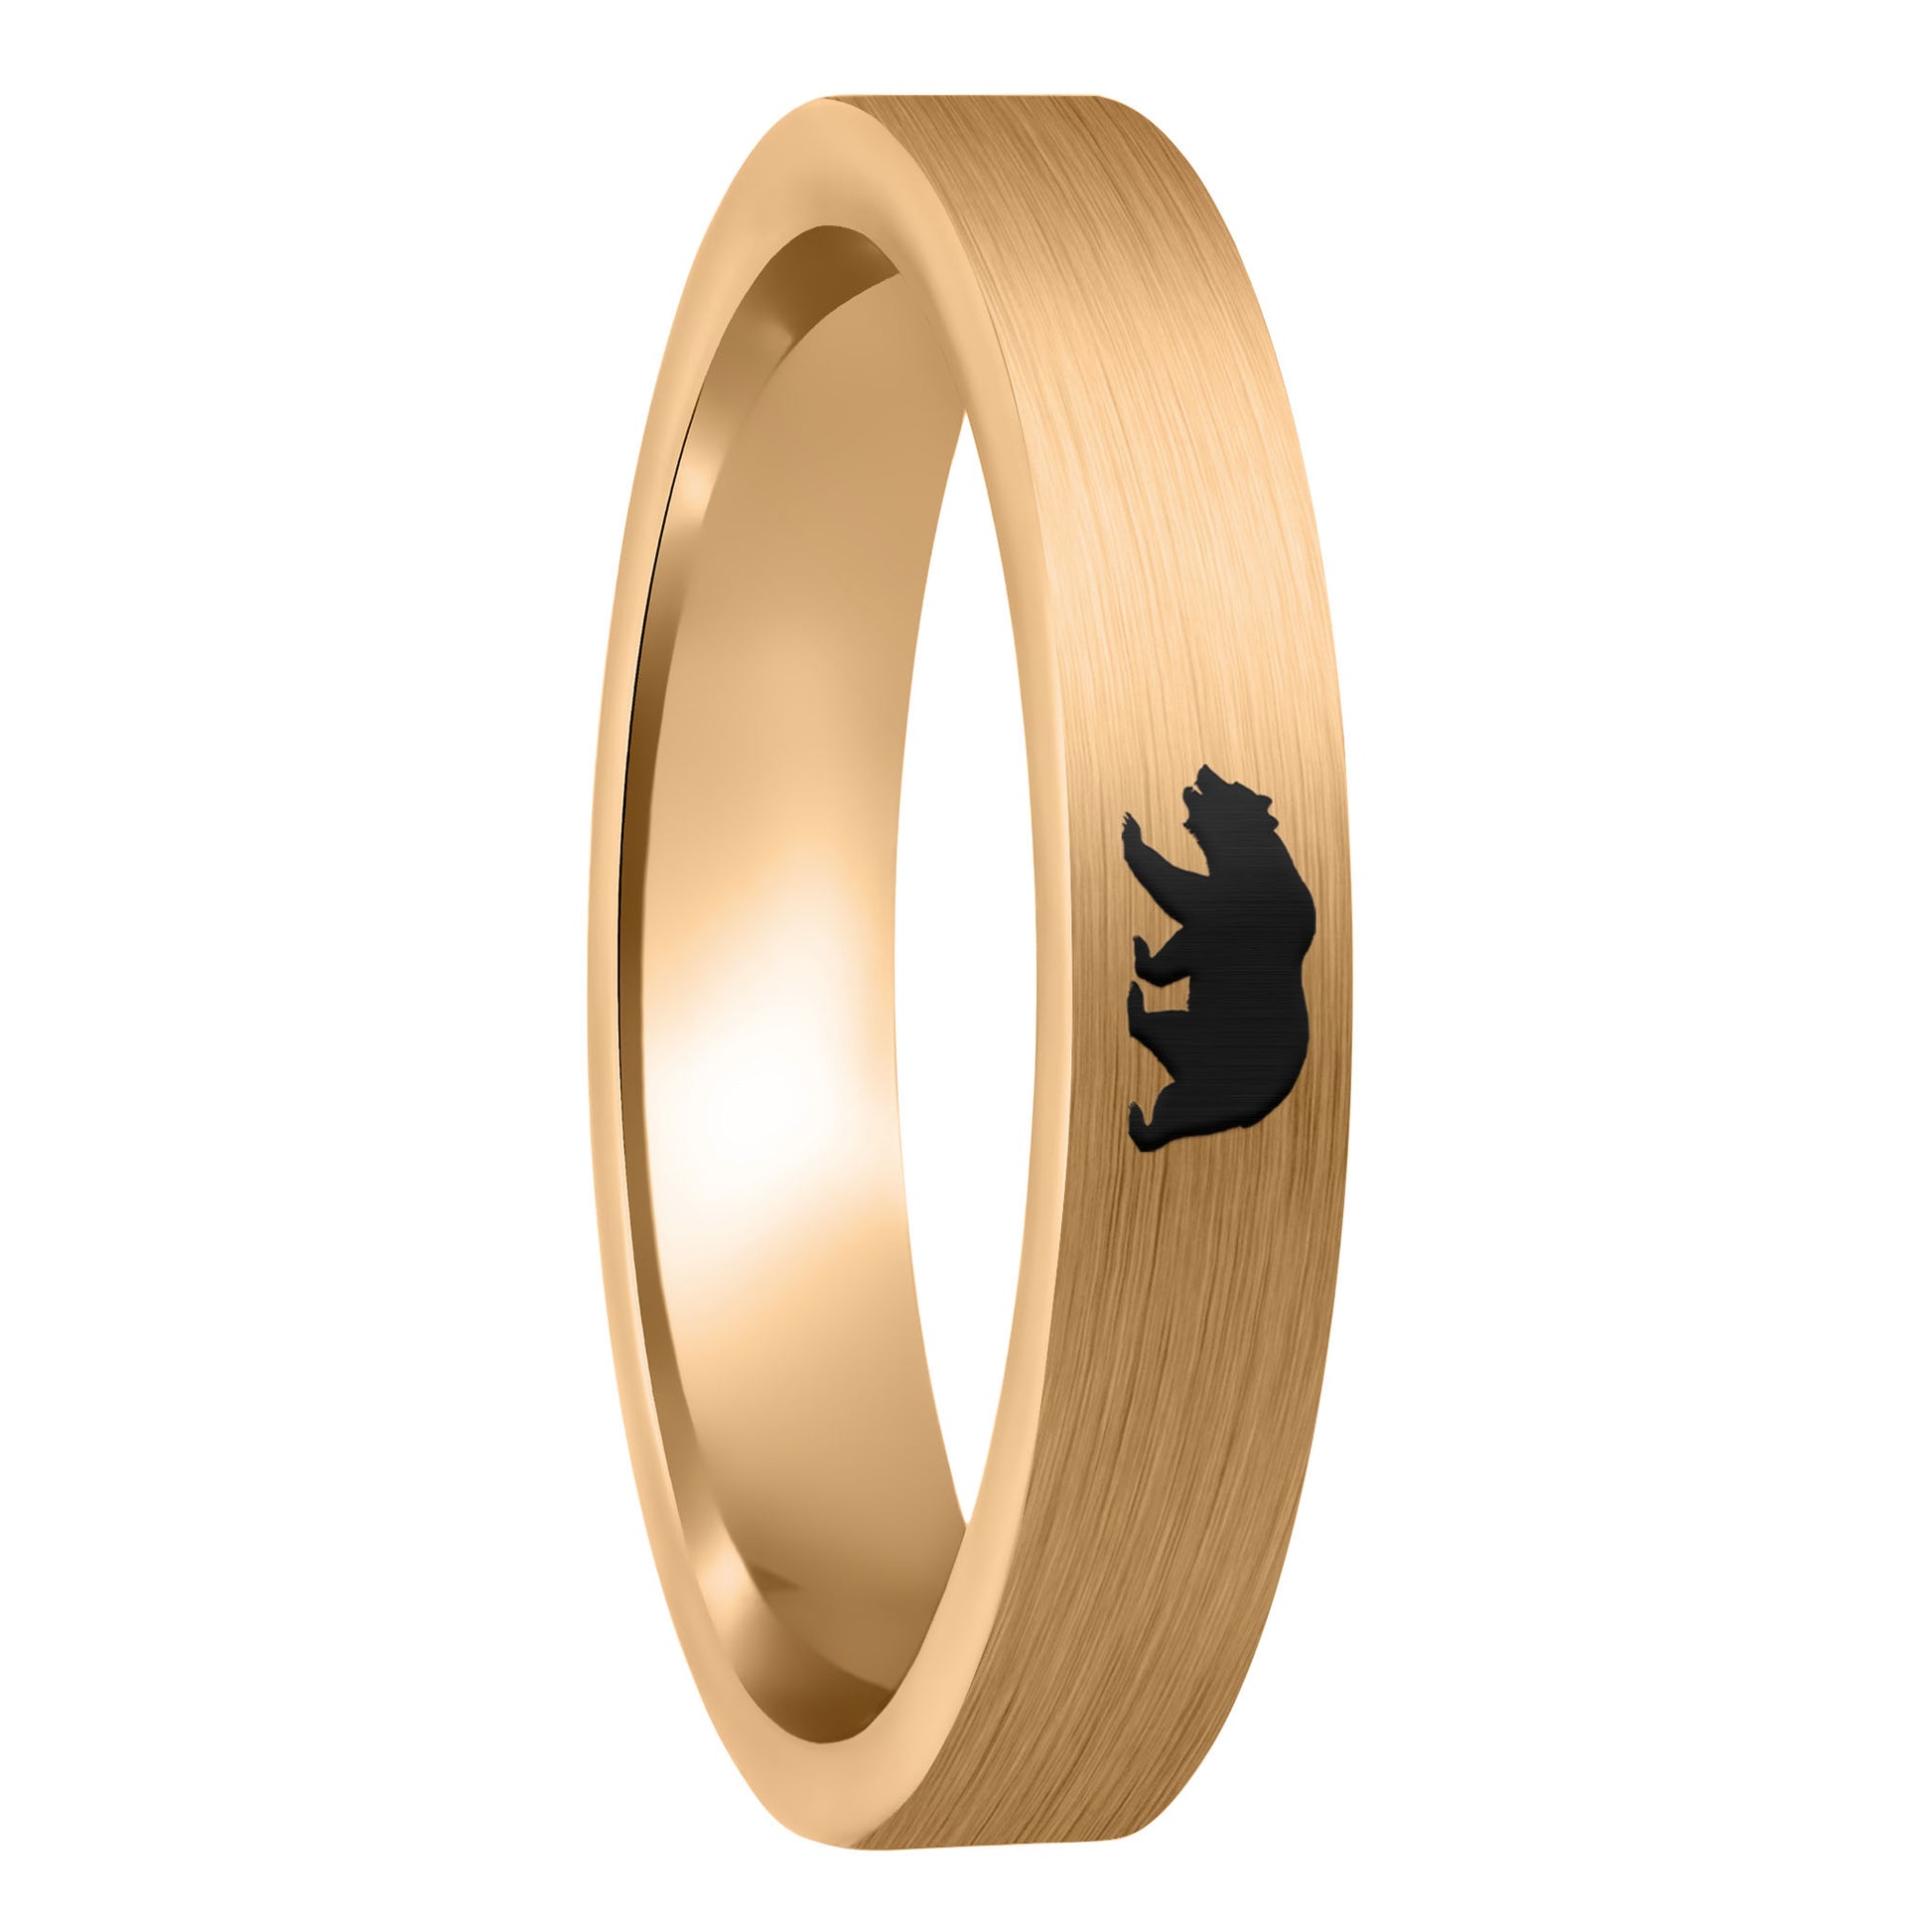 A bear brushed rose gold tungsten women's wedding band displayed on a plain white background.